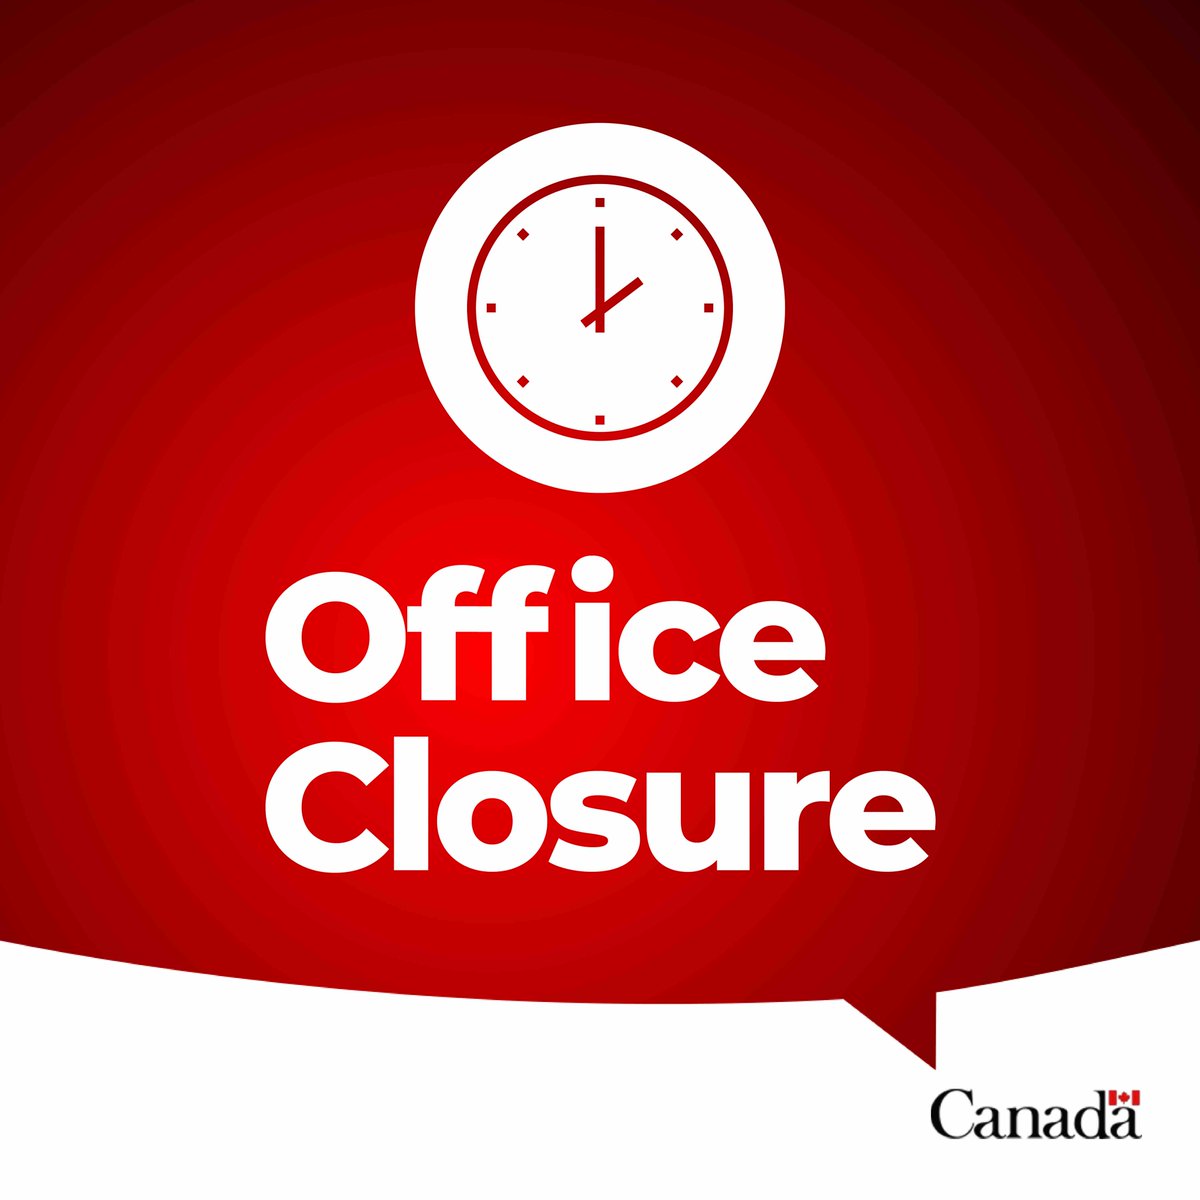 ➡ [NOTICE] Please note that the Embassy of Canada to Senegal will be closed on April 10, 2024. Canadian citizens 🇨🇦 : For any emergency please contact us via sos@international.gc.ca or +1 613 996 8885